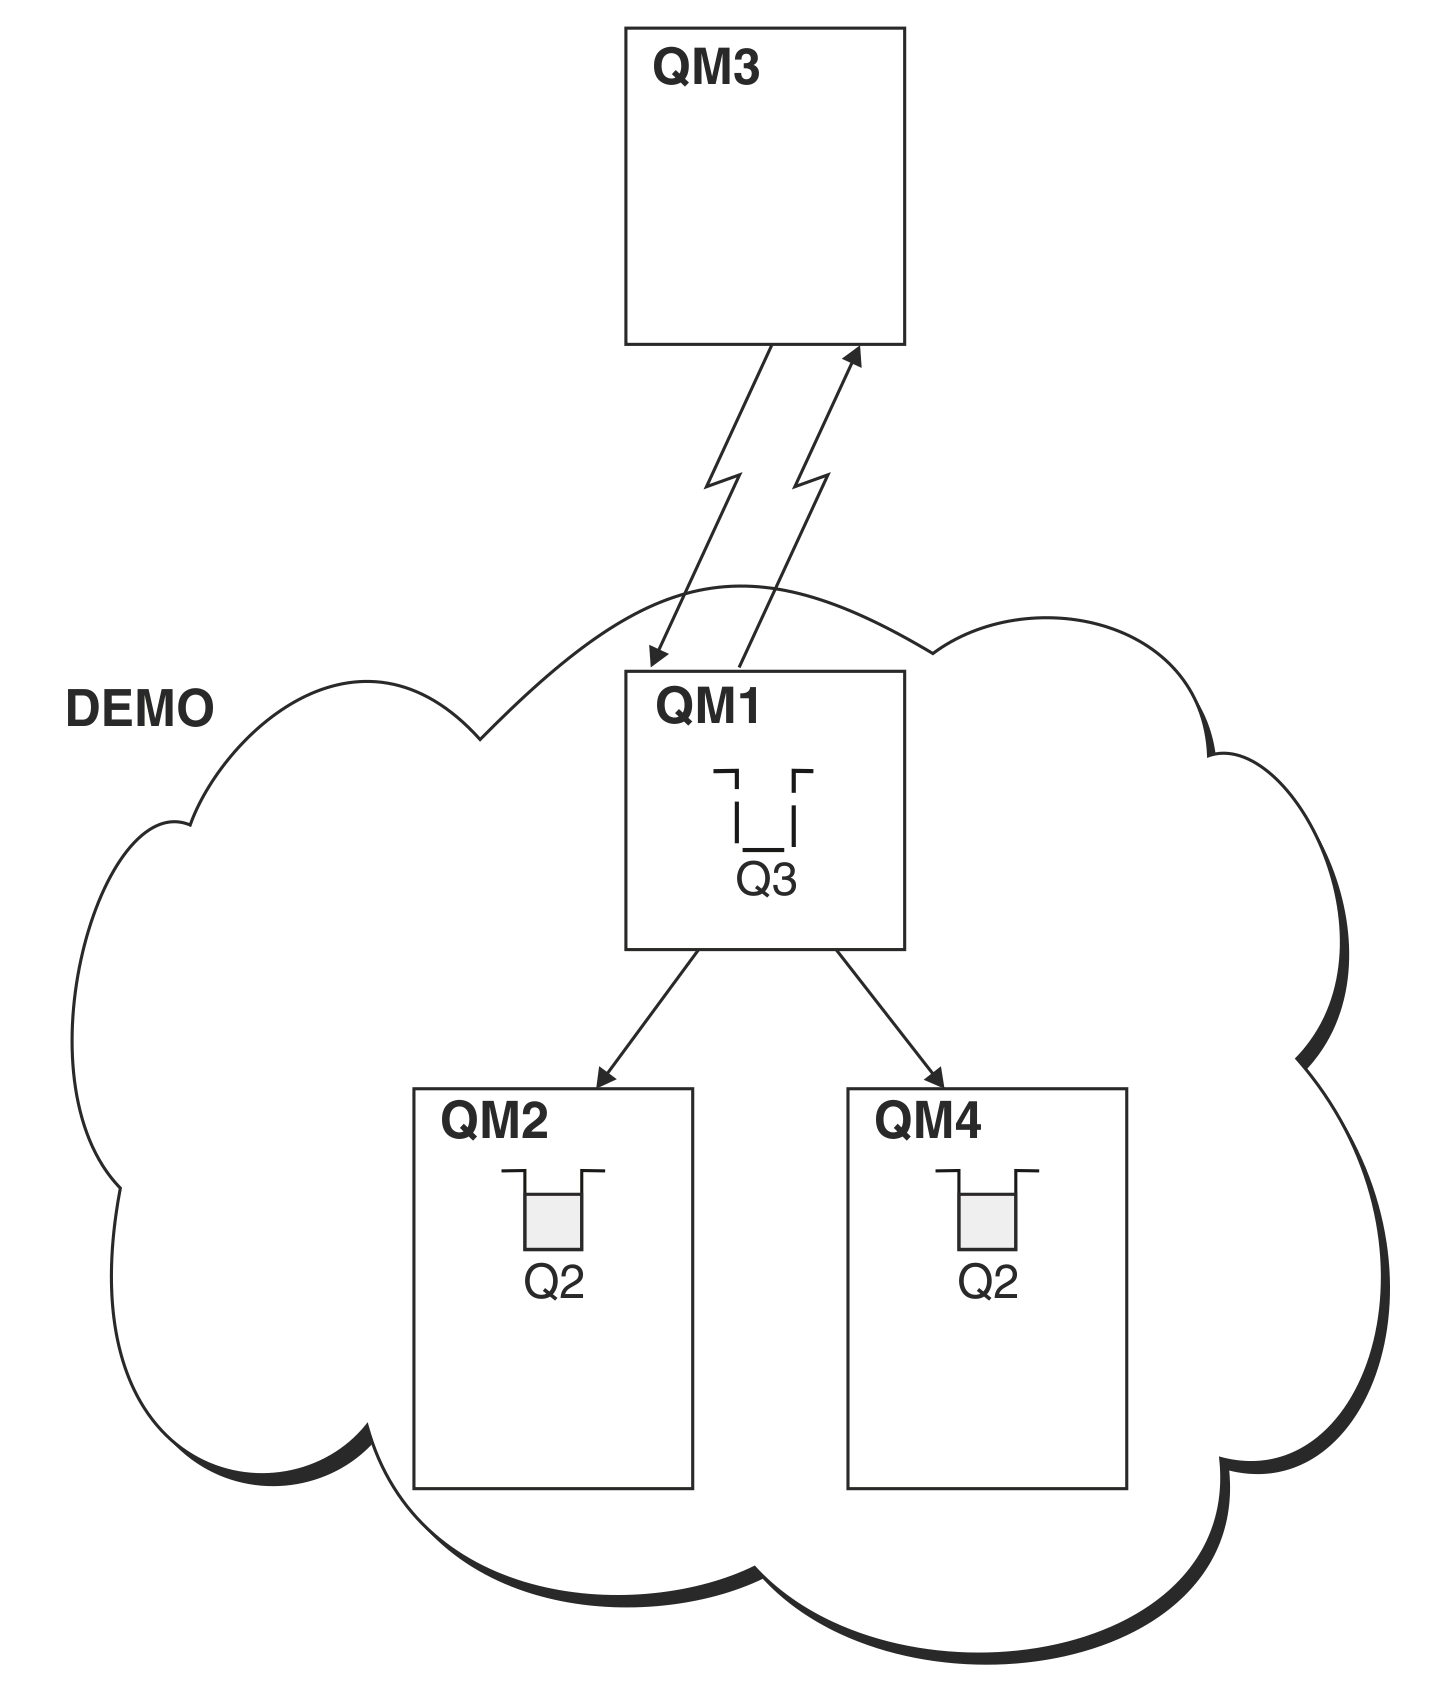 This diagram shows three connected queue managers inside a cluster, QM1, QM2, and QM4. QM1 is connected to a queue manager outside of the cluster, QM3. QM2 and QM4 each have a queue, Q2, and a remote queue, Q3.